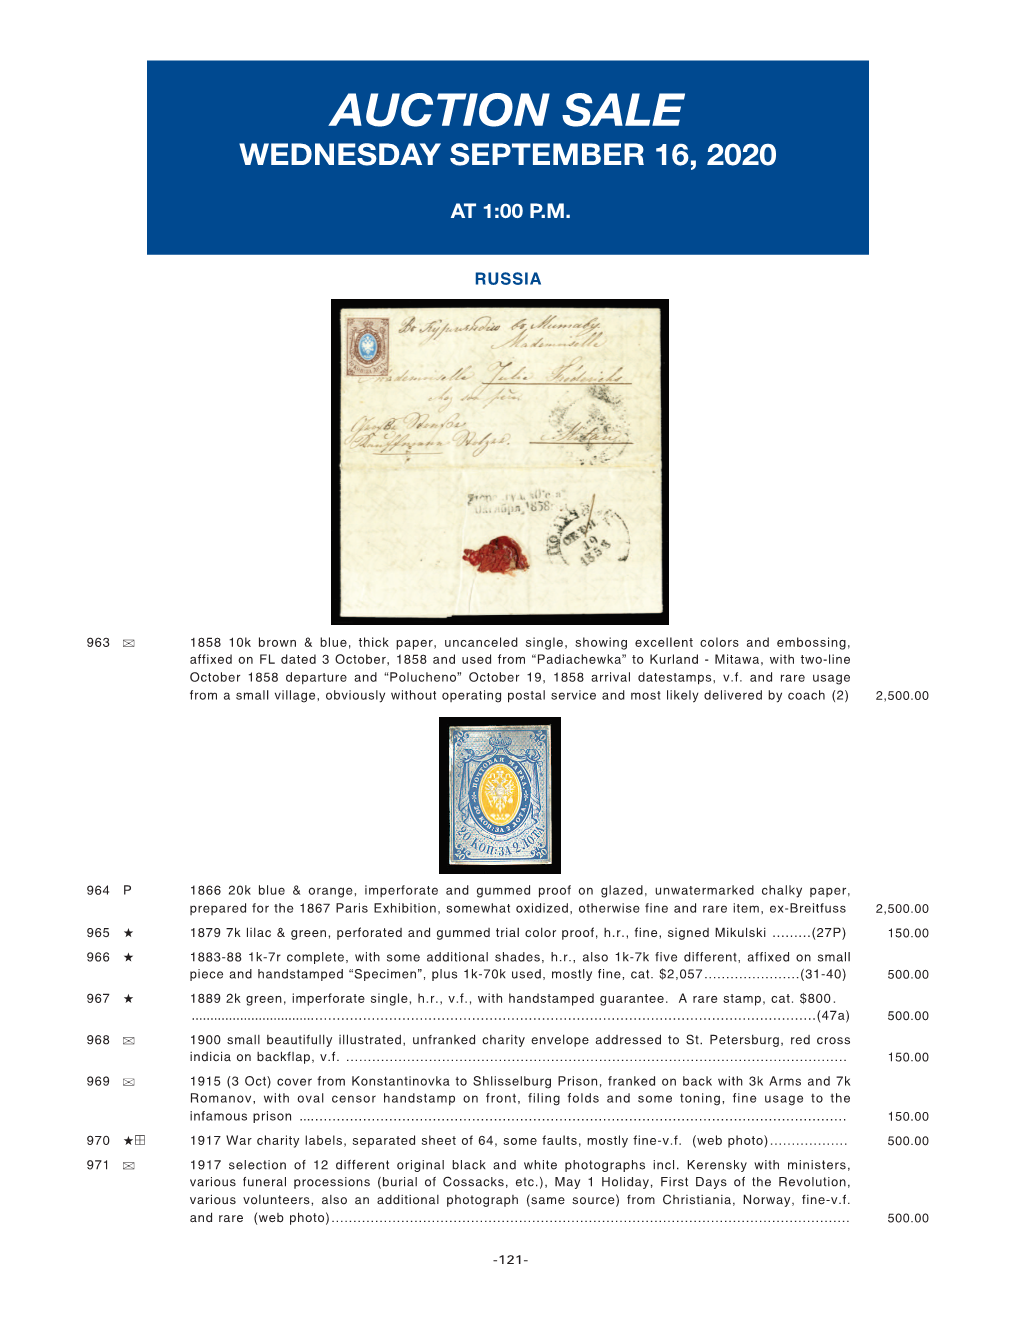 Auction Sale Wednesday September 16, 2020